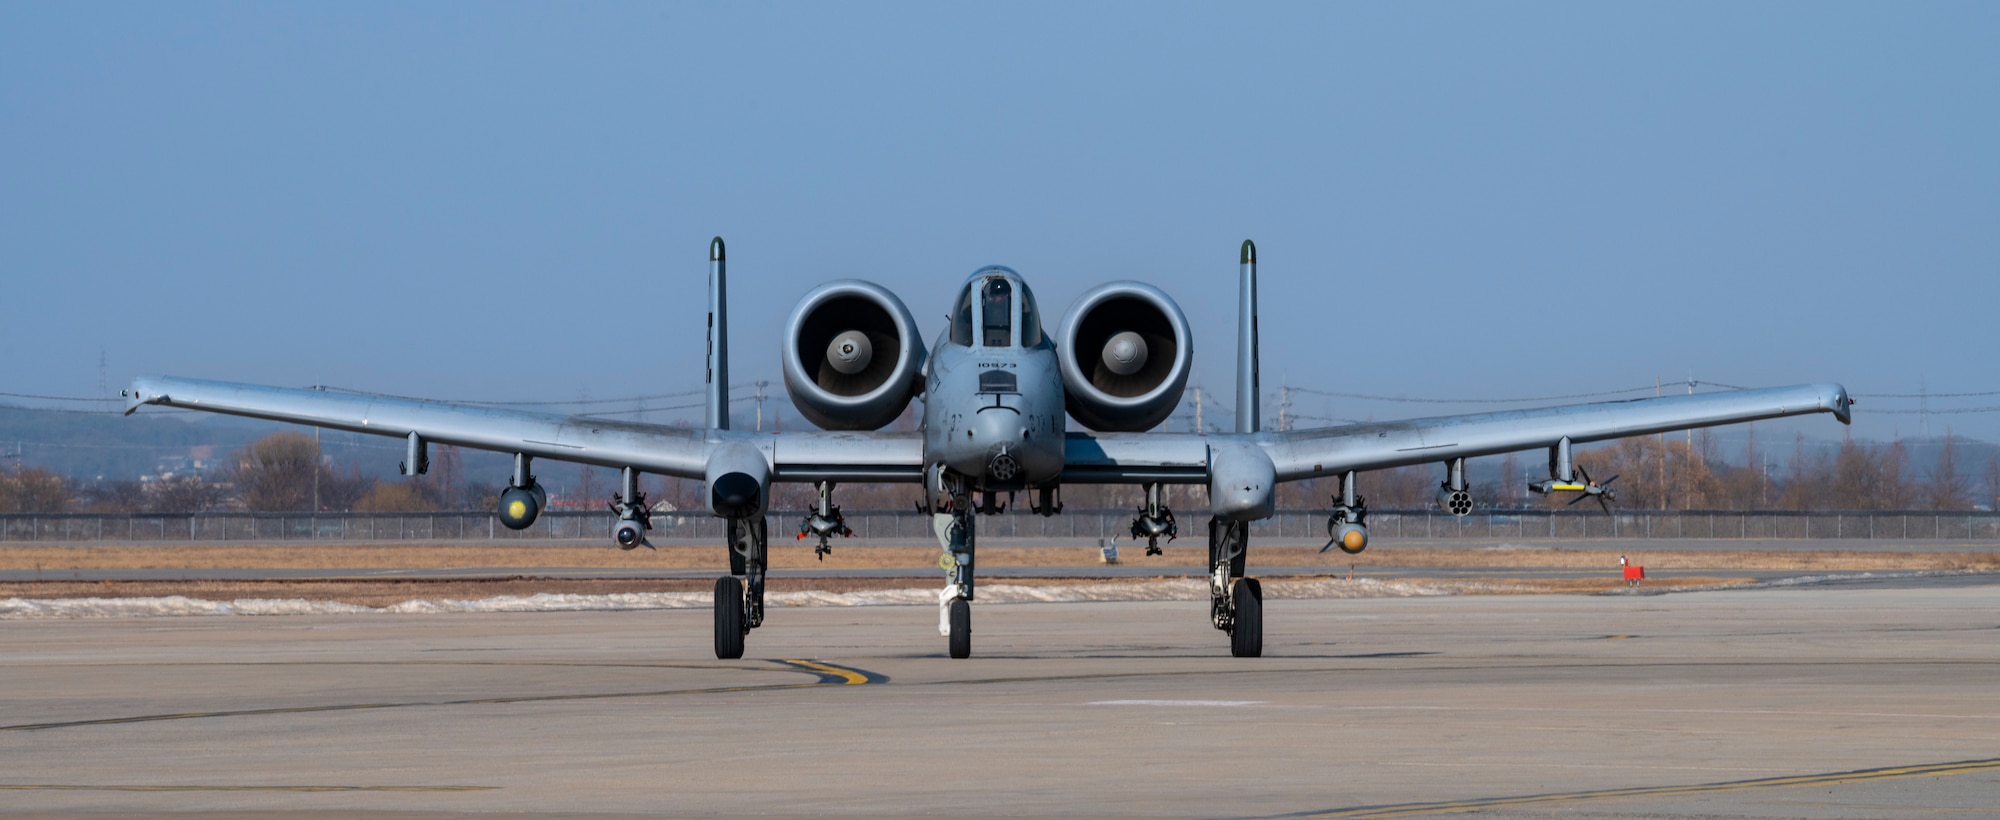 An A-10 Thunderbolt II assigned to the 25th Fighter Squadron taxies on the runway following a training mission at Osan Air Base, Republic of Korea, Jan. 4, 2023.